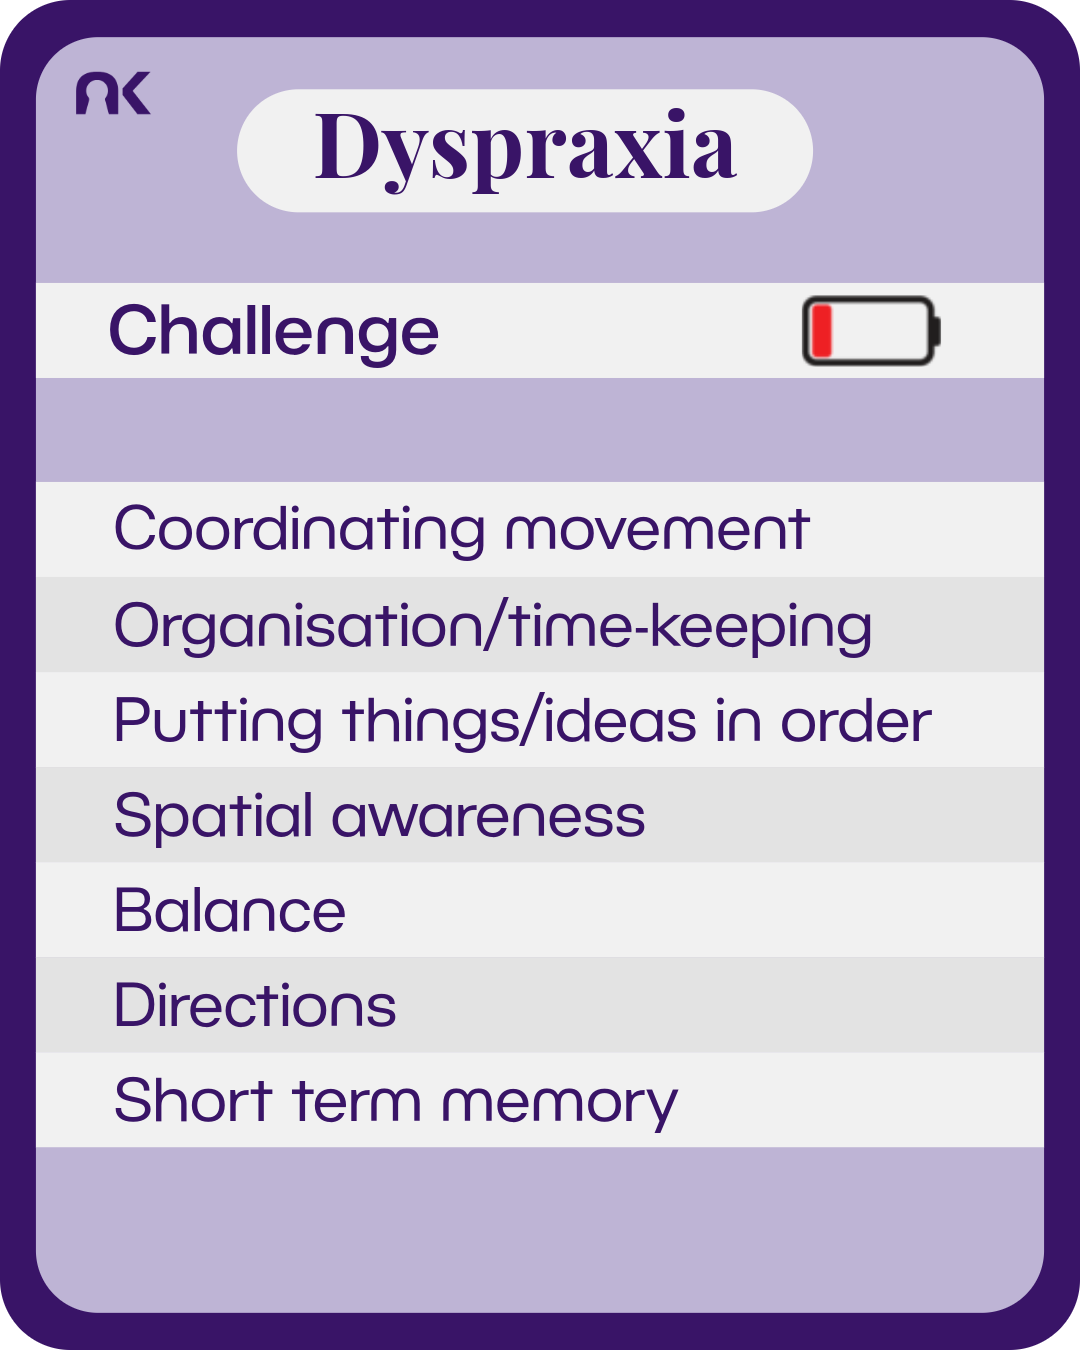 An information card made to look like it is from a card game. Next to the subtitle "challenge" is a battery with red bar to show low charge. Text says: "Dyspraxia. Challenge. Coordinating movement; Organisation/time keeping; Putting things/ideas in order; Spatial awareness; Balance; Directions; Short term memory."